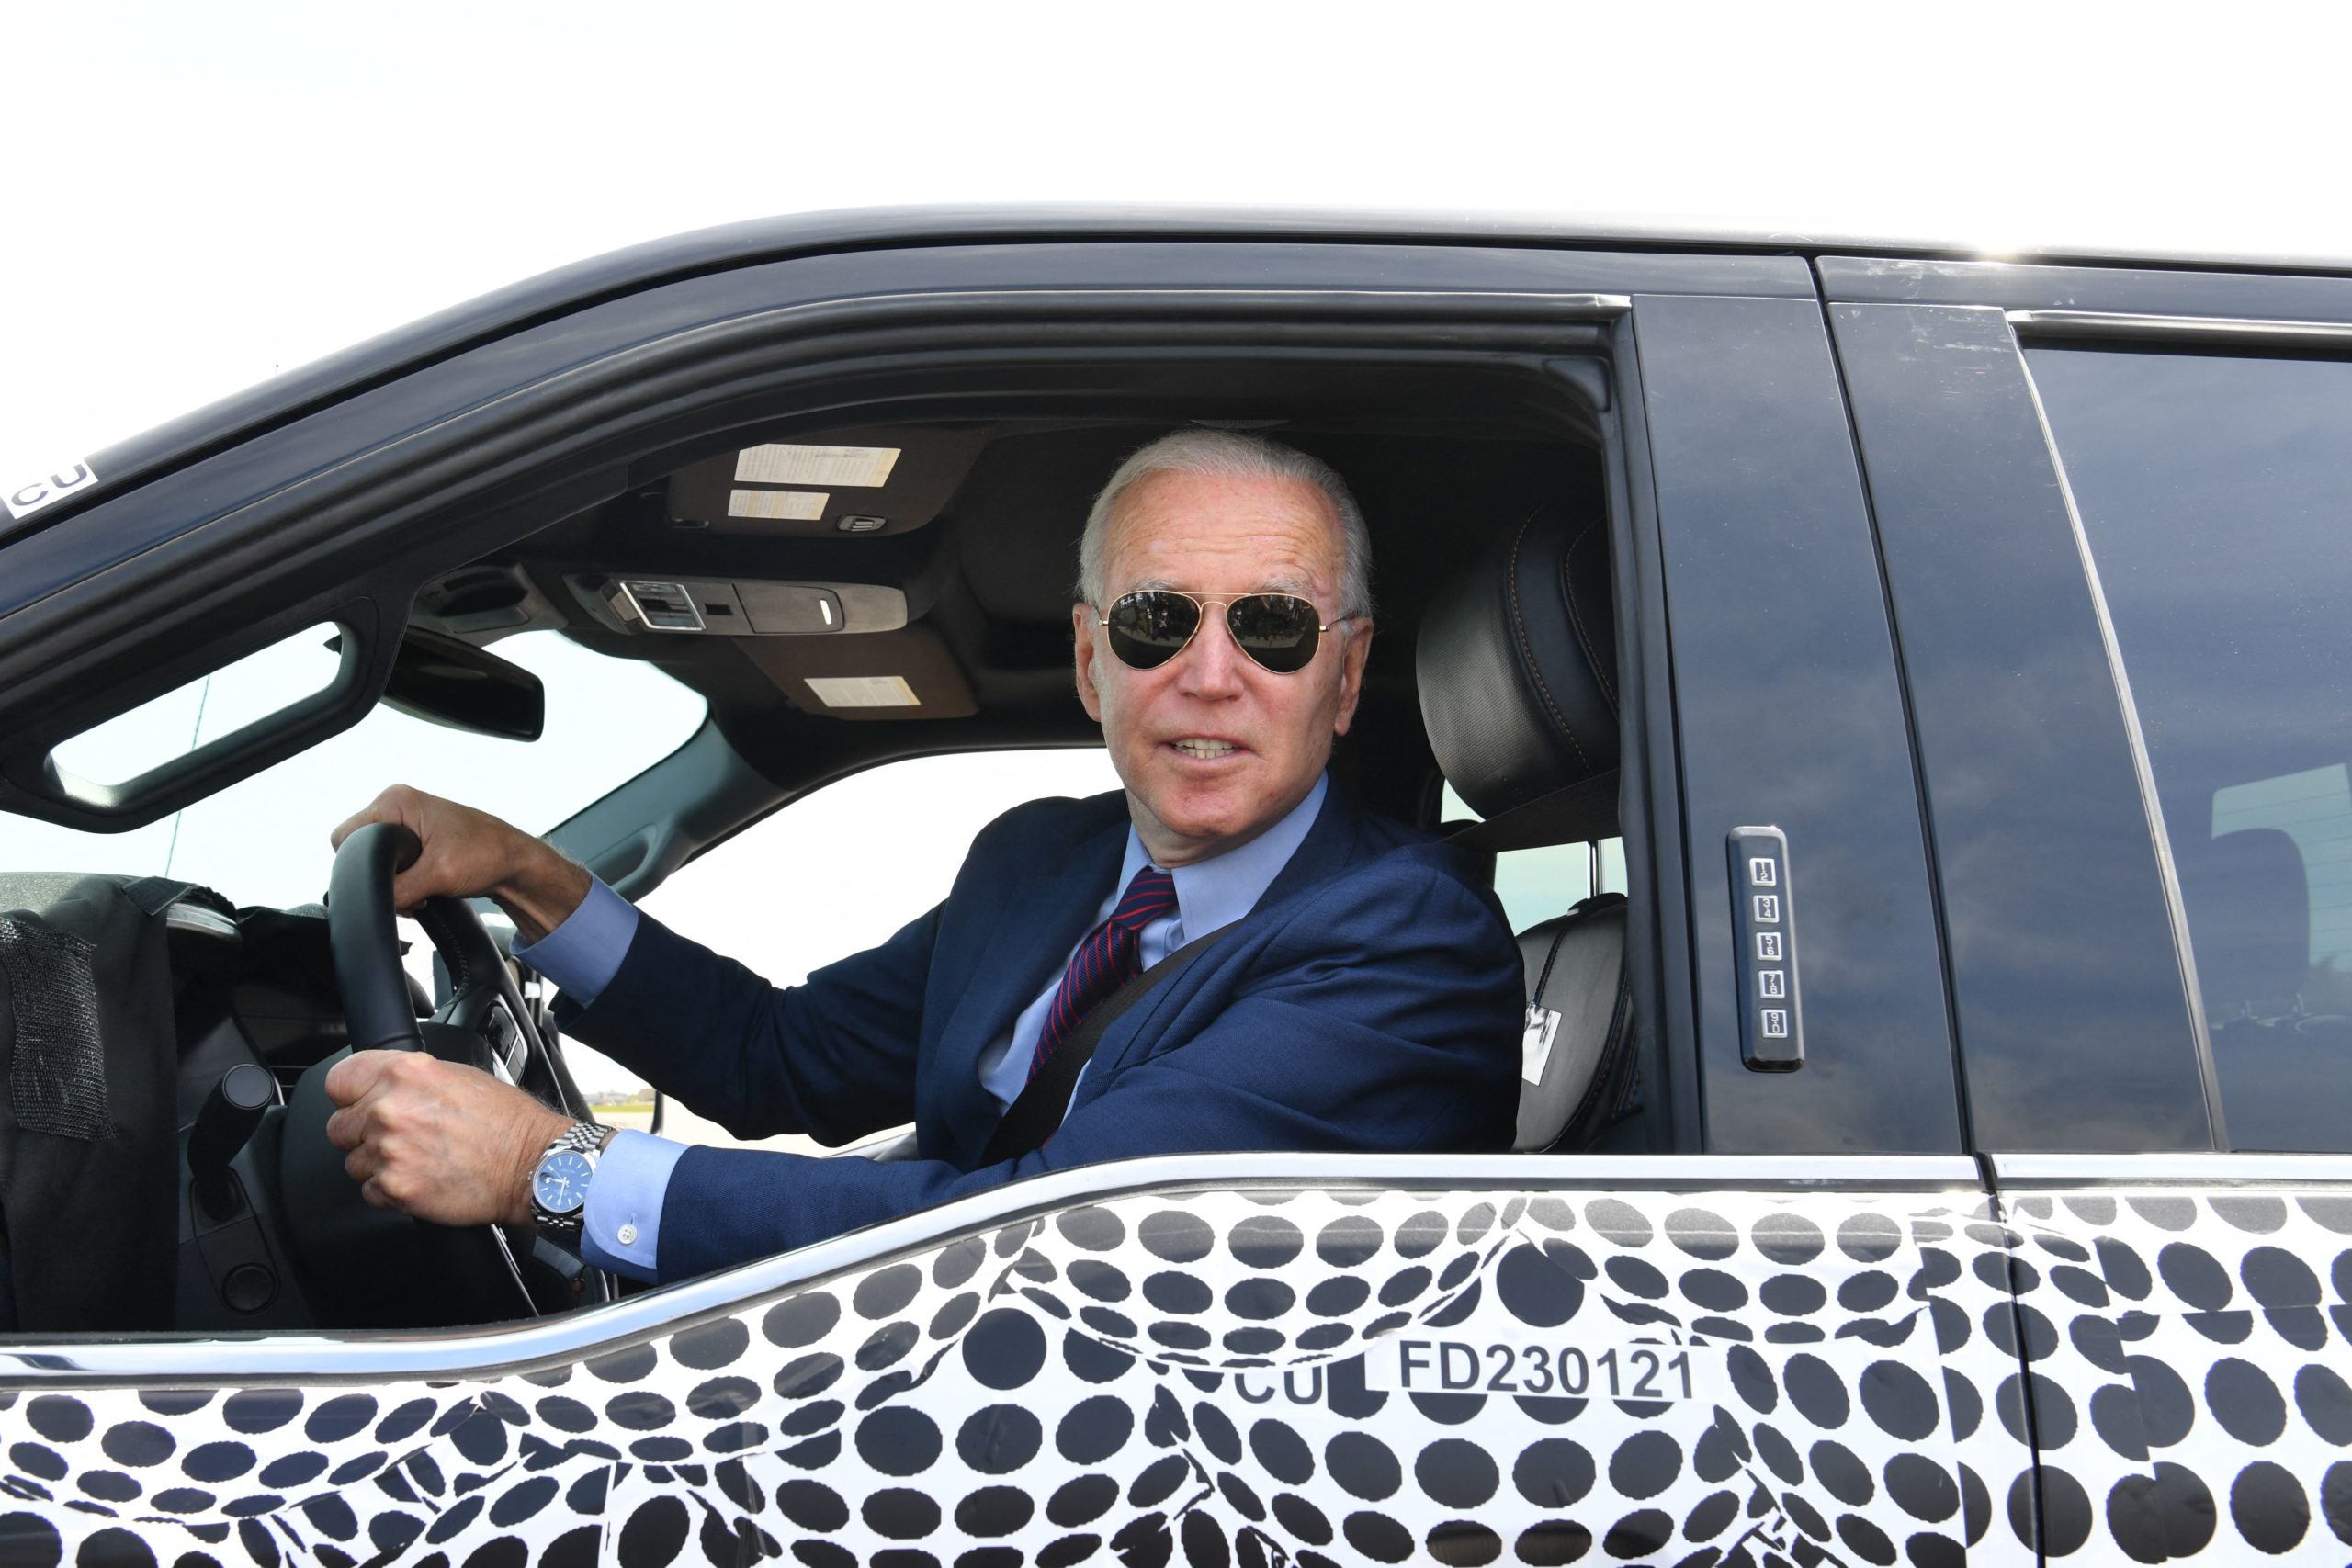 President Joe Biden drives a Ford F-150 Lightning at the Ford Dearborn Development Center in Dearborn, Michigan on May 18. (Nicholas Kamm/AFP via Getty Images)